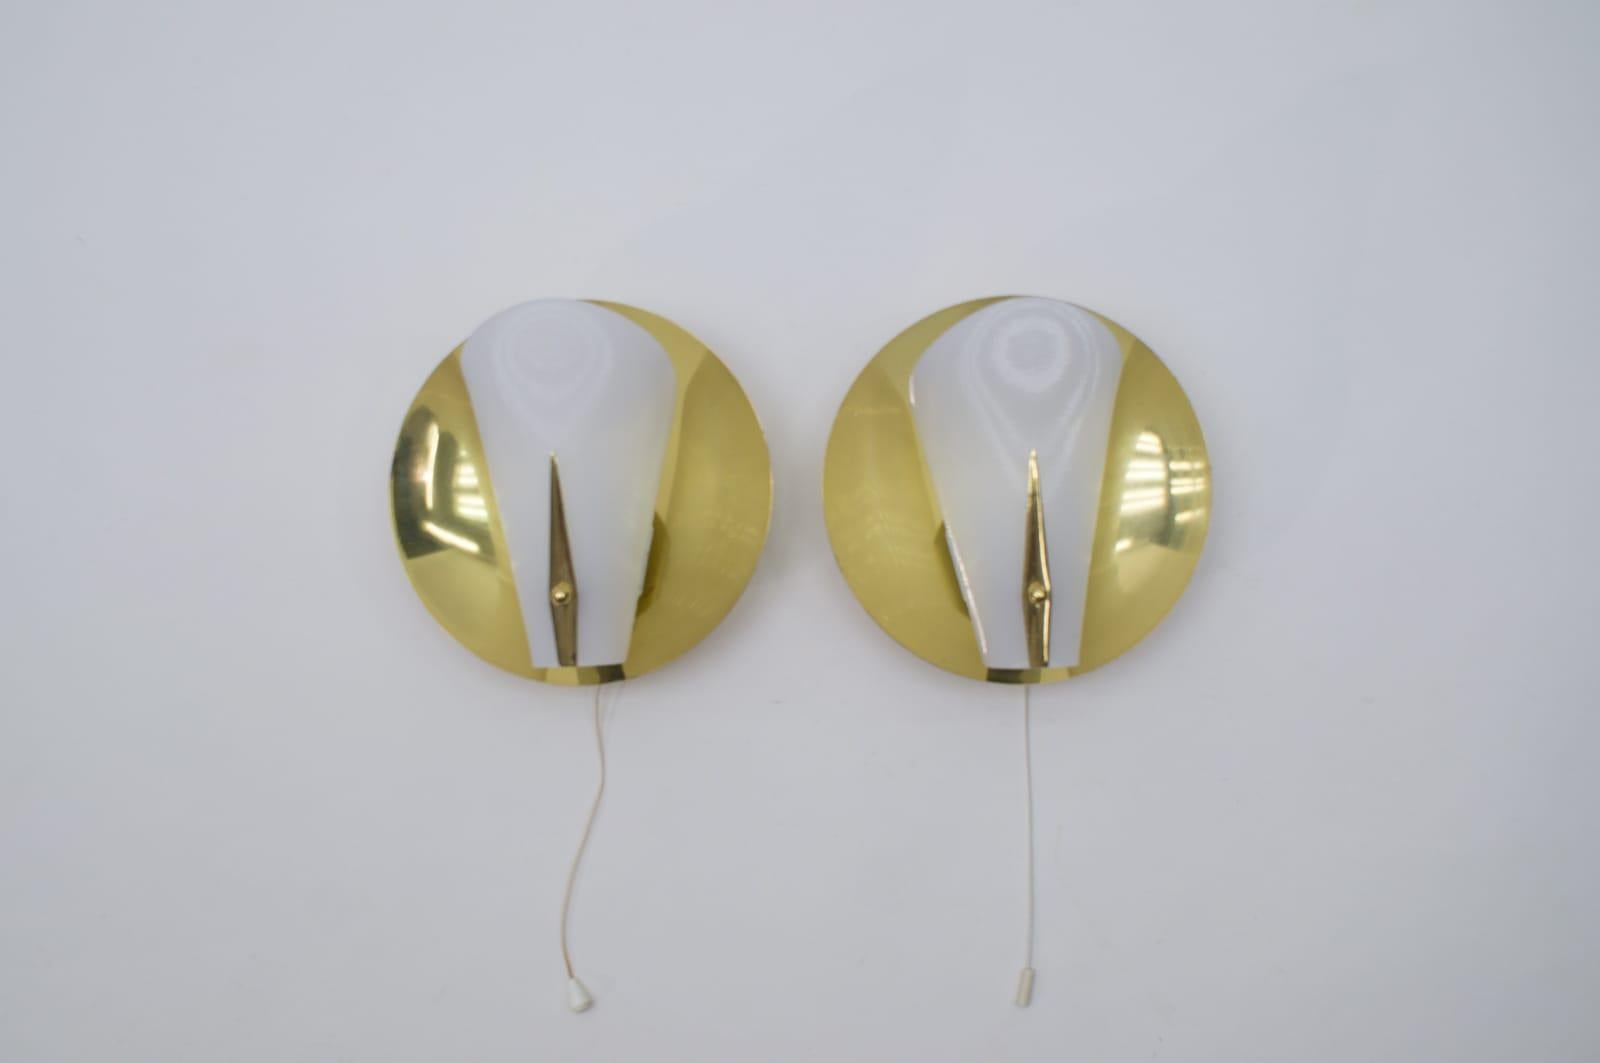 Mid-20th Century Set of Two Mid-Century Modern Brass Wall Lamps or Sconces, 1950s For Sale